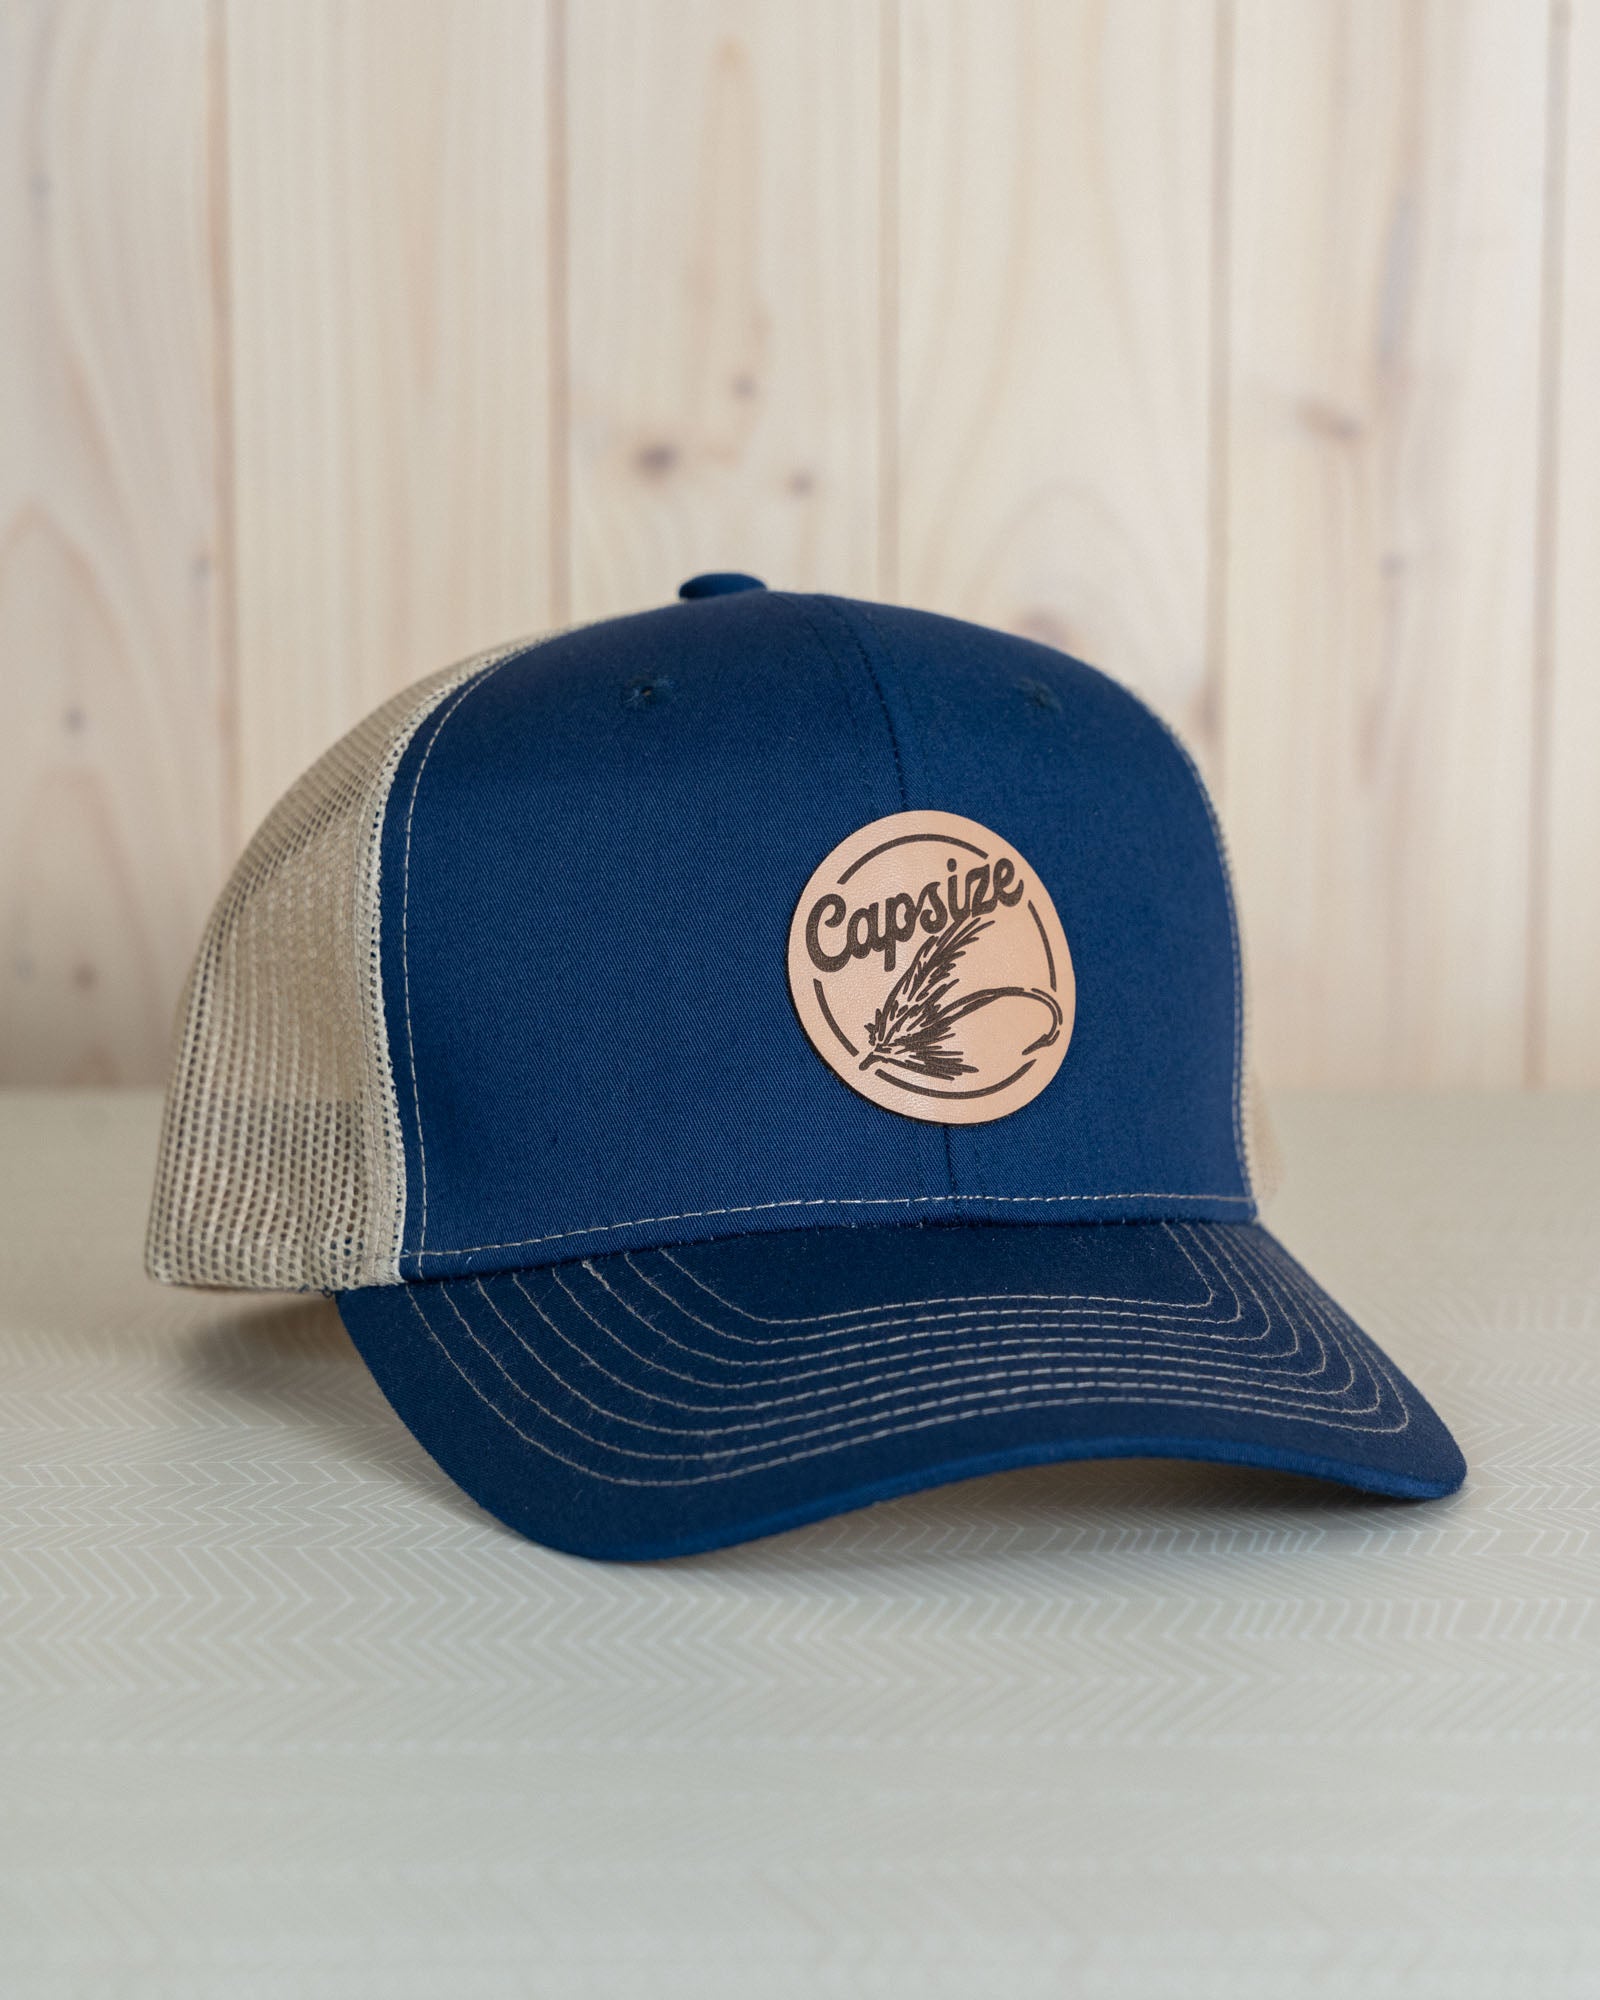 Limited Edition Hat | Leather Fly Blue/Khaki Trucker - Capsize Fly Fishing